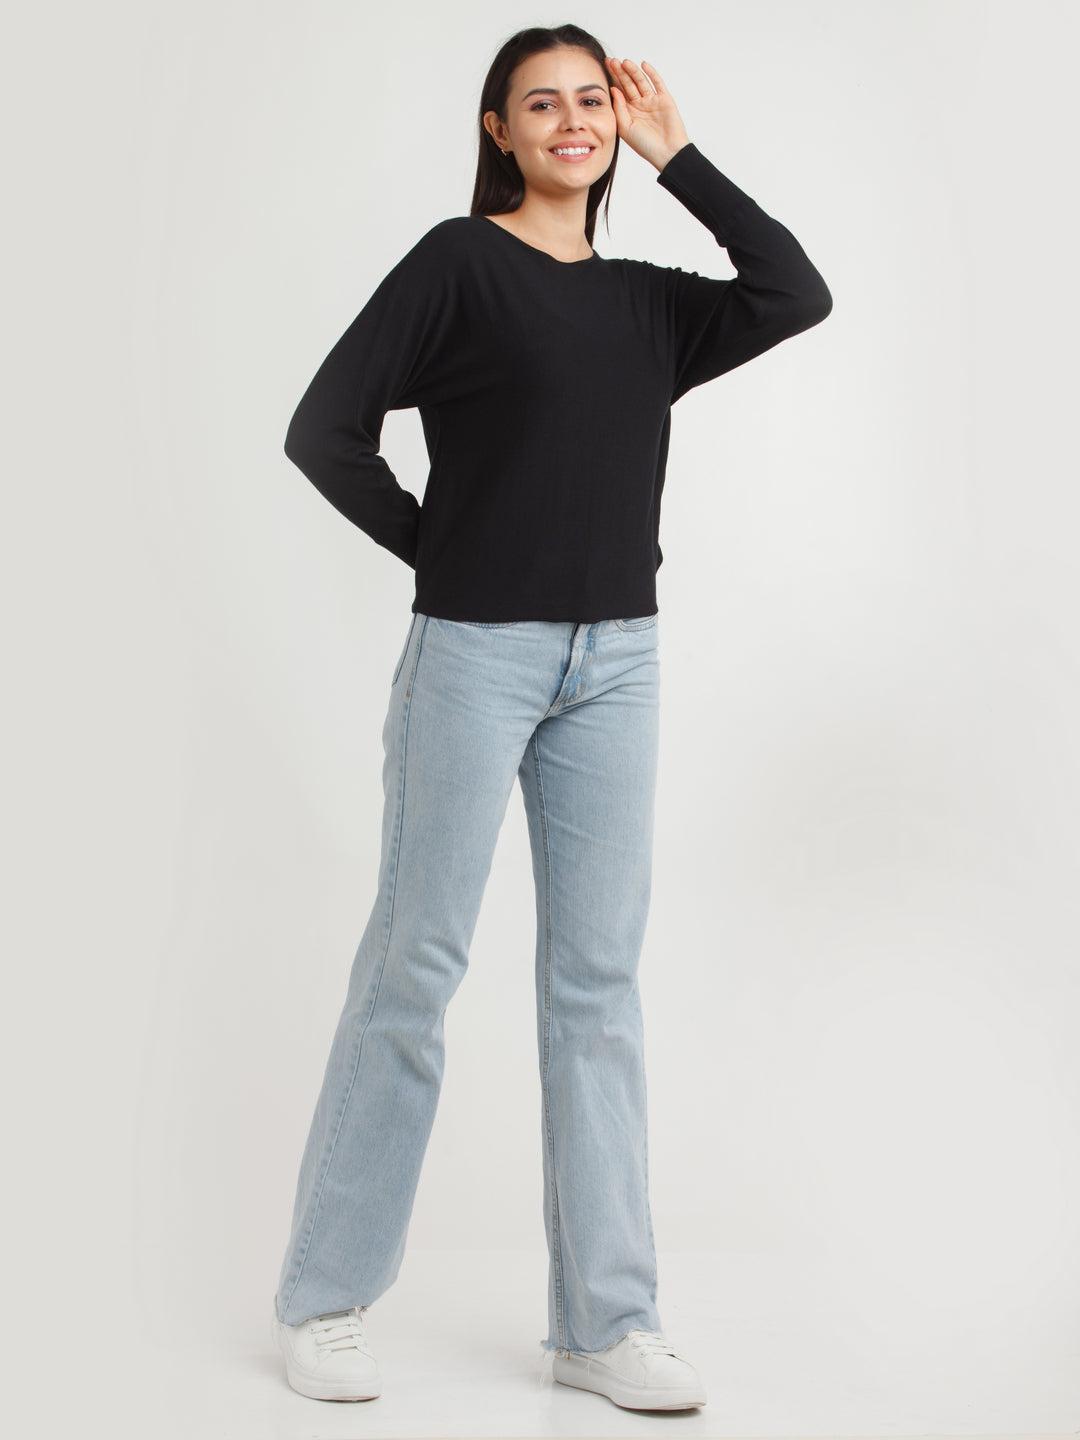 black-solid-sweater-for-women